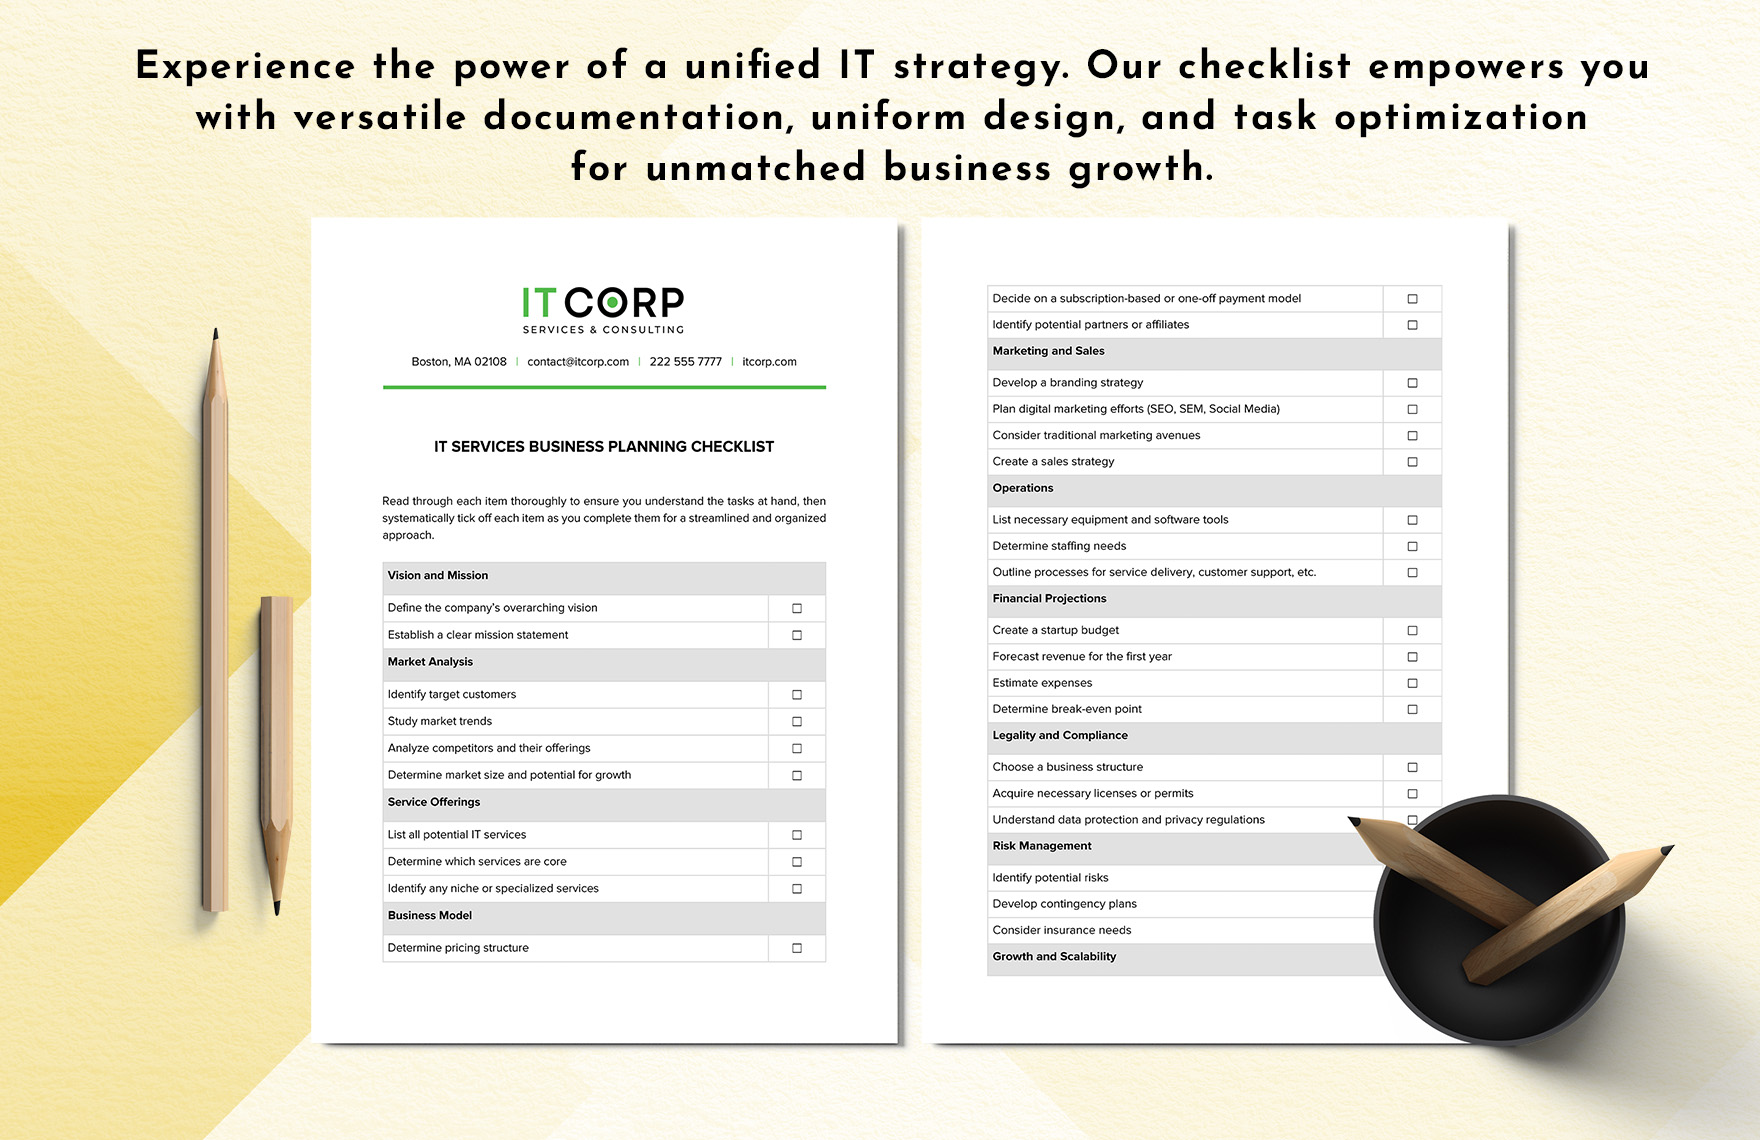 IT Service Business Planning Checklist Template